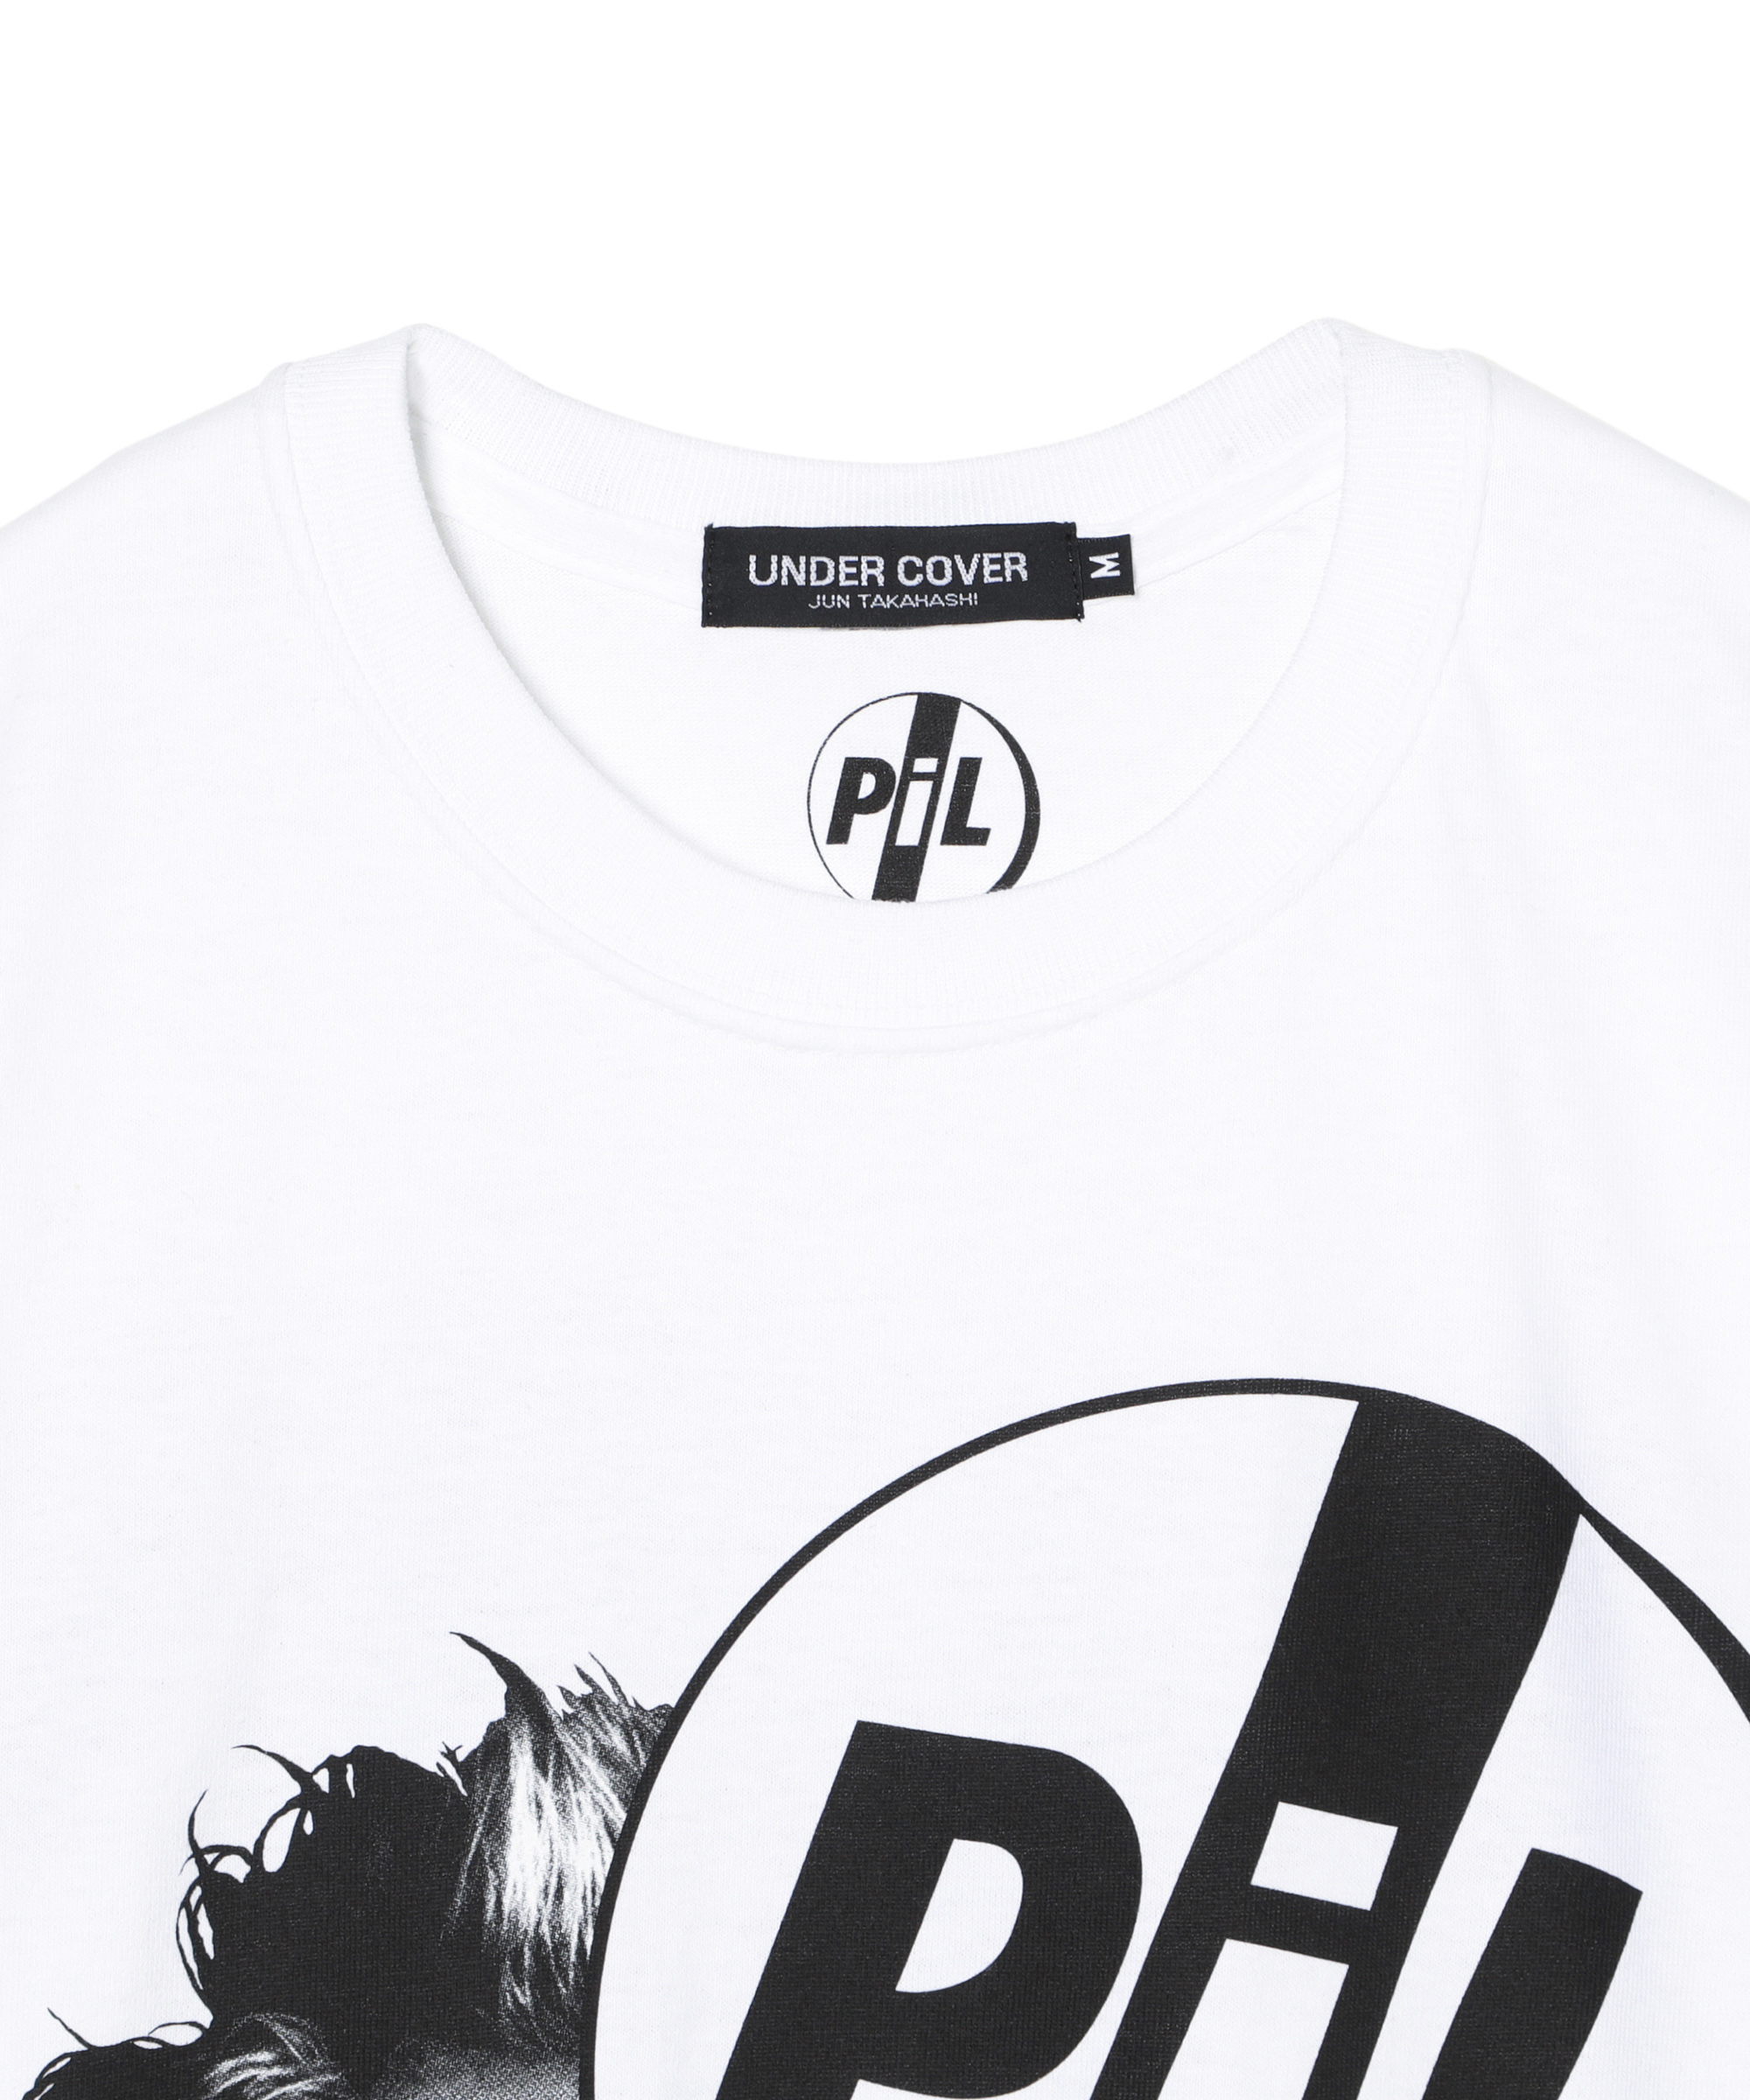 Undercover xPIL public image limited tee - Tシャツ/カットソー(半袖